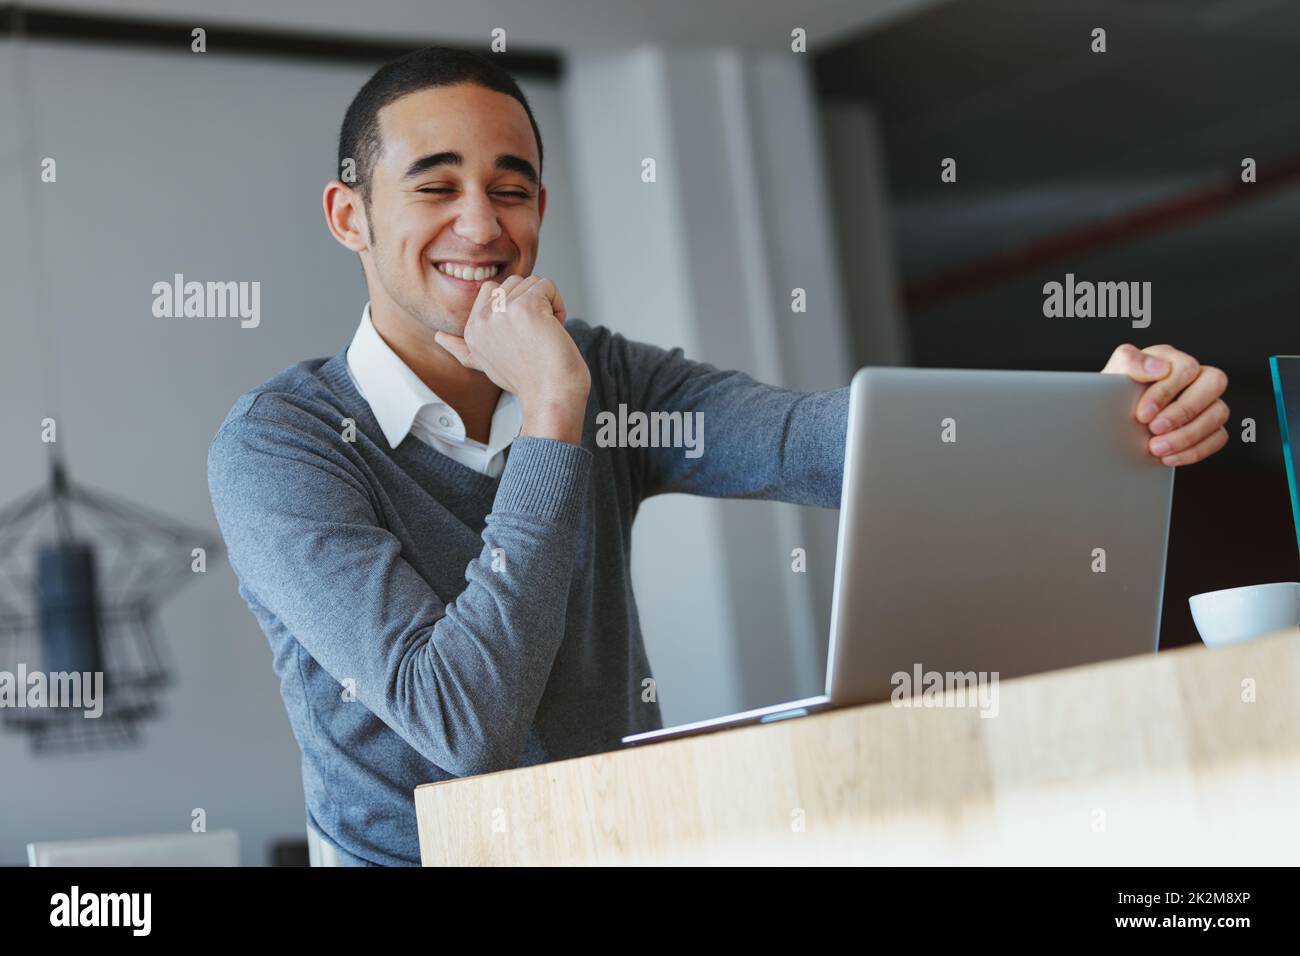 Black man smiling as he works on his laptop or watches media Stock Photo